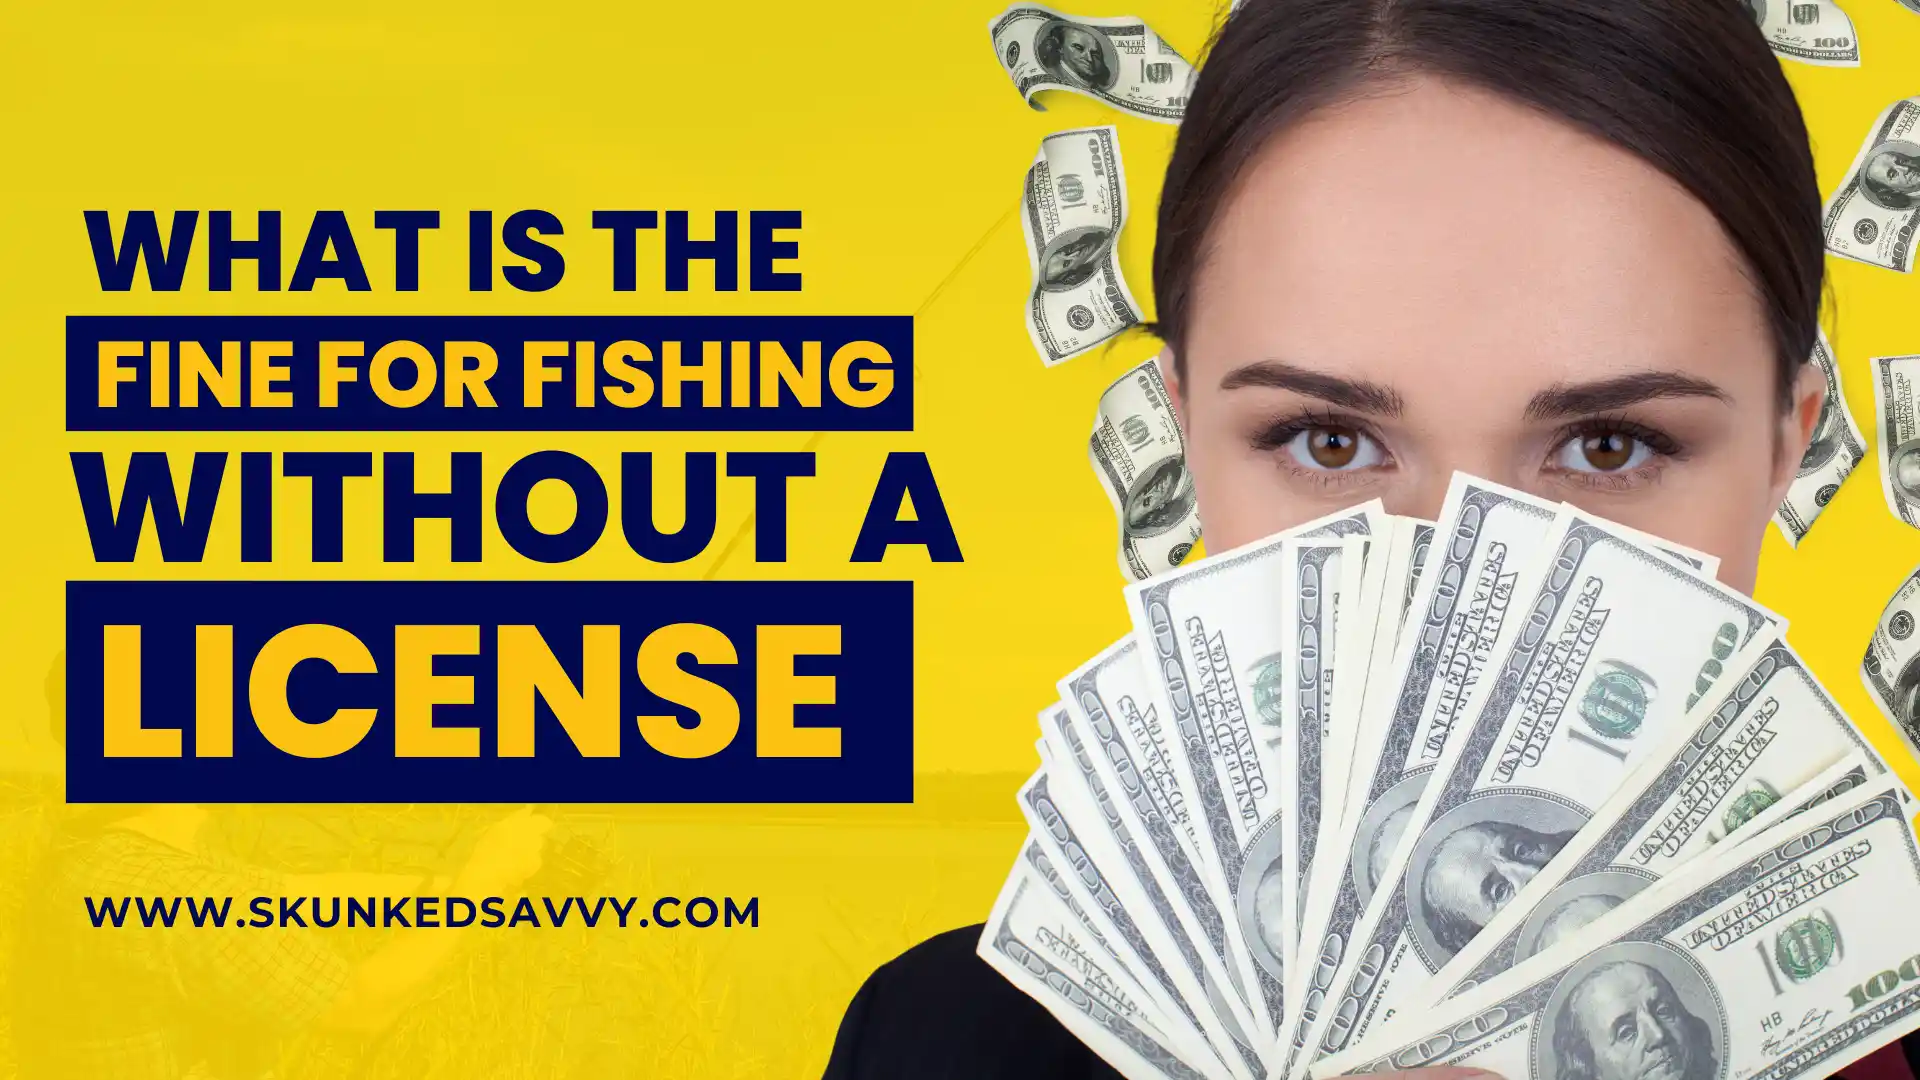 What Is the Fine for Fishing Without a License